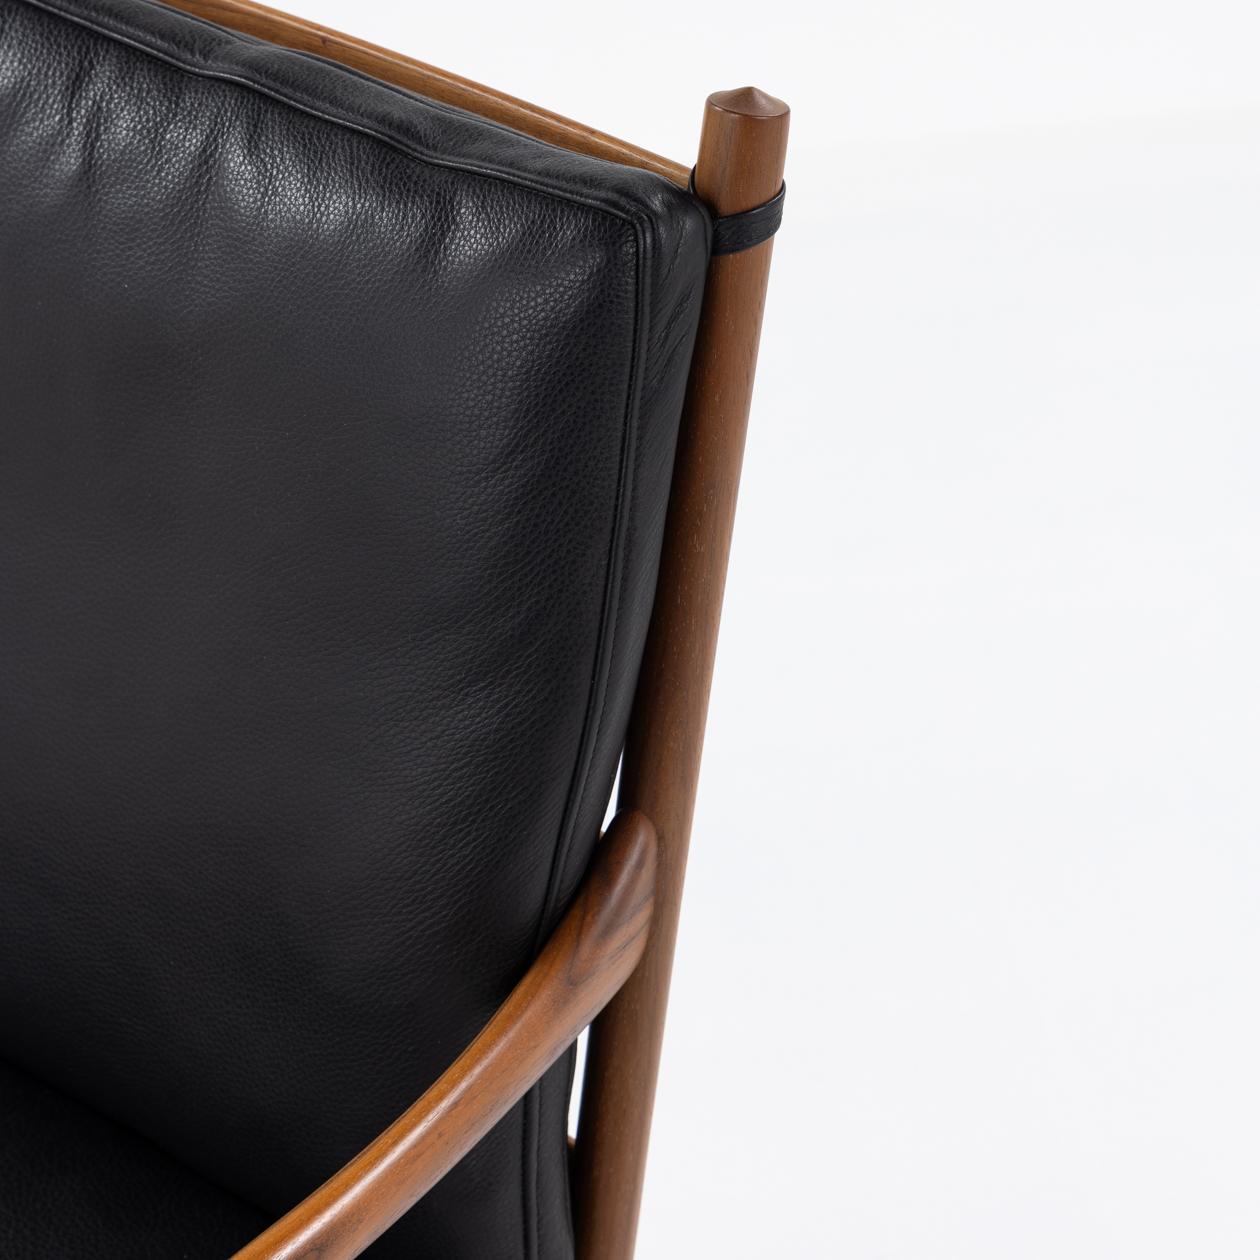 PJ 149 - 'Colonial chair' in black leather and walnut by Ole Wanscher In Good Condition For Sale In Copenhagen, DK